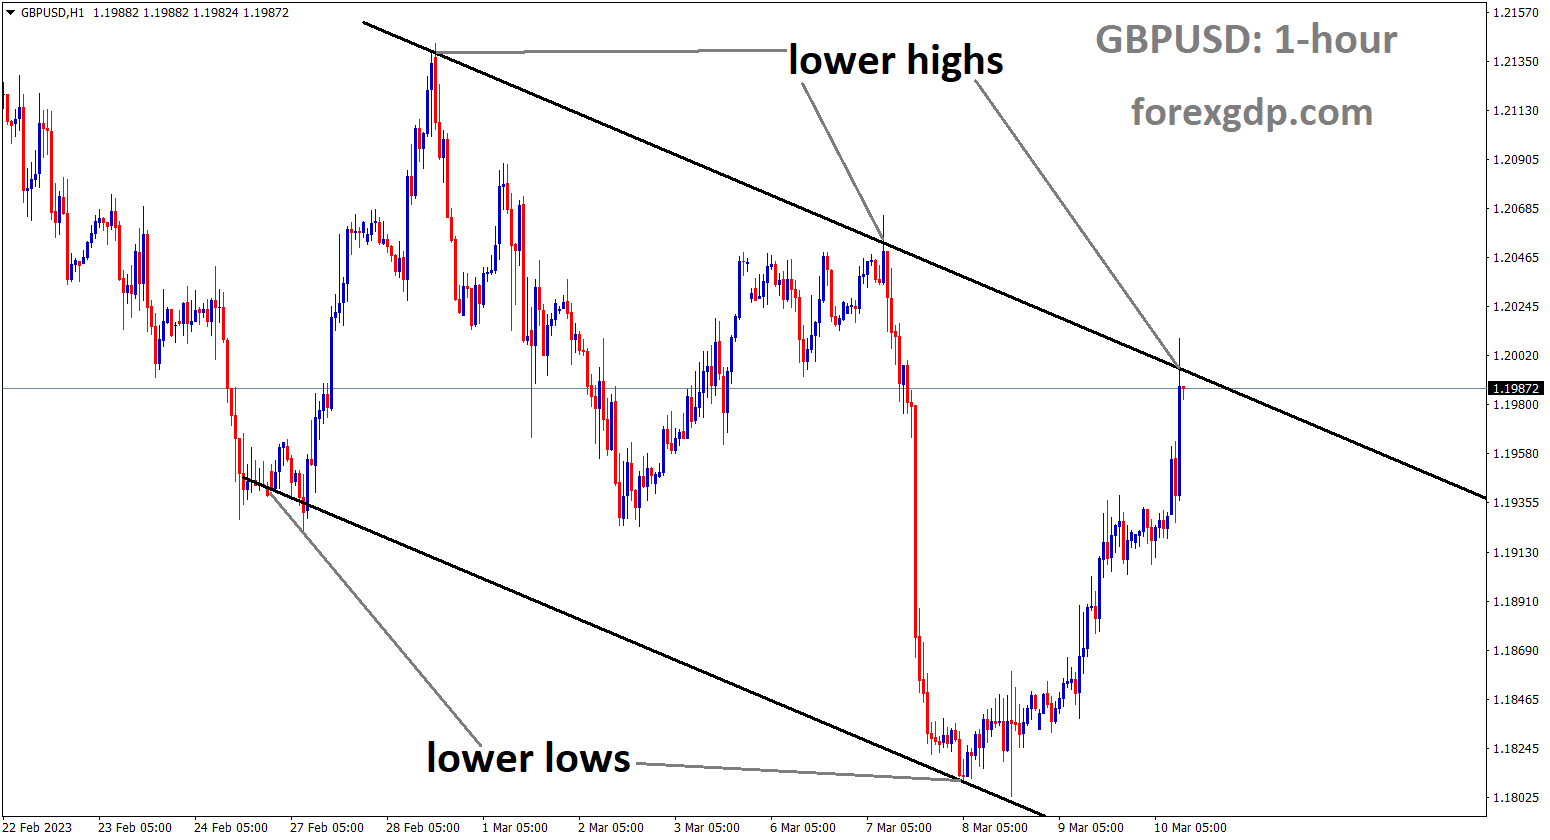 GBPUSD is moving in Descending channel and the market has reached the lower high area of the channel.